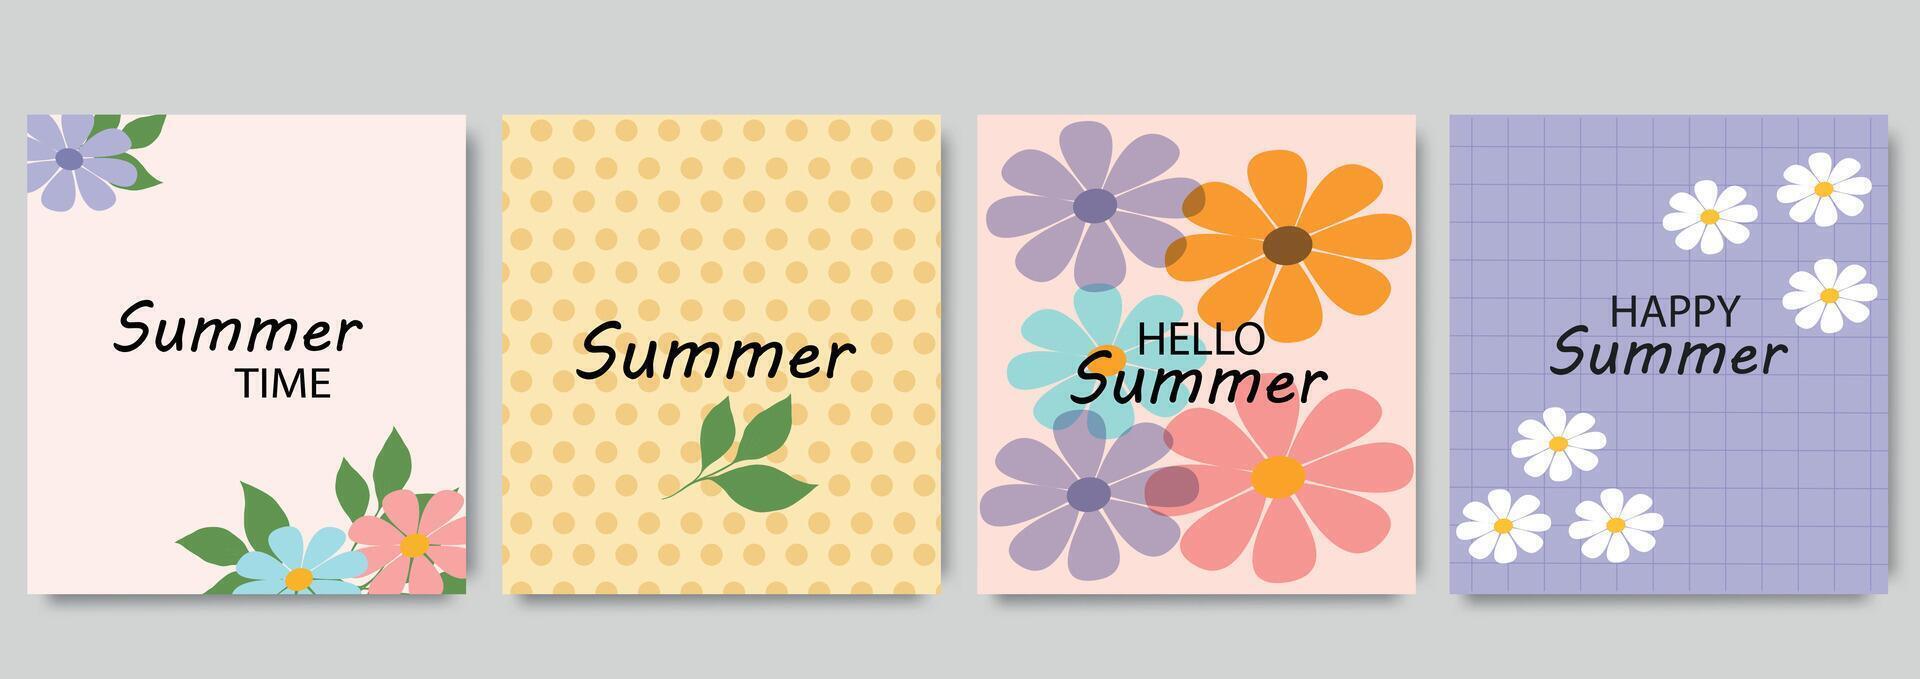 Creative summer season floral square cover vector. Set of banner design with flowers, leaves, branch. sale,wedding,Colorful blossom background for social media post, website, business, ads. vector